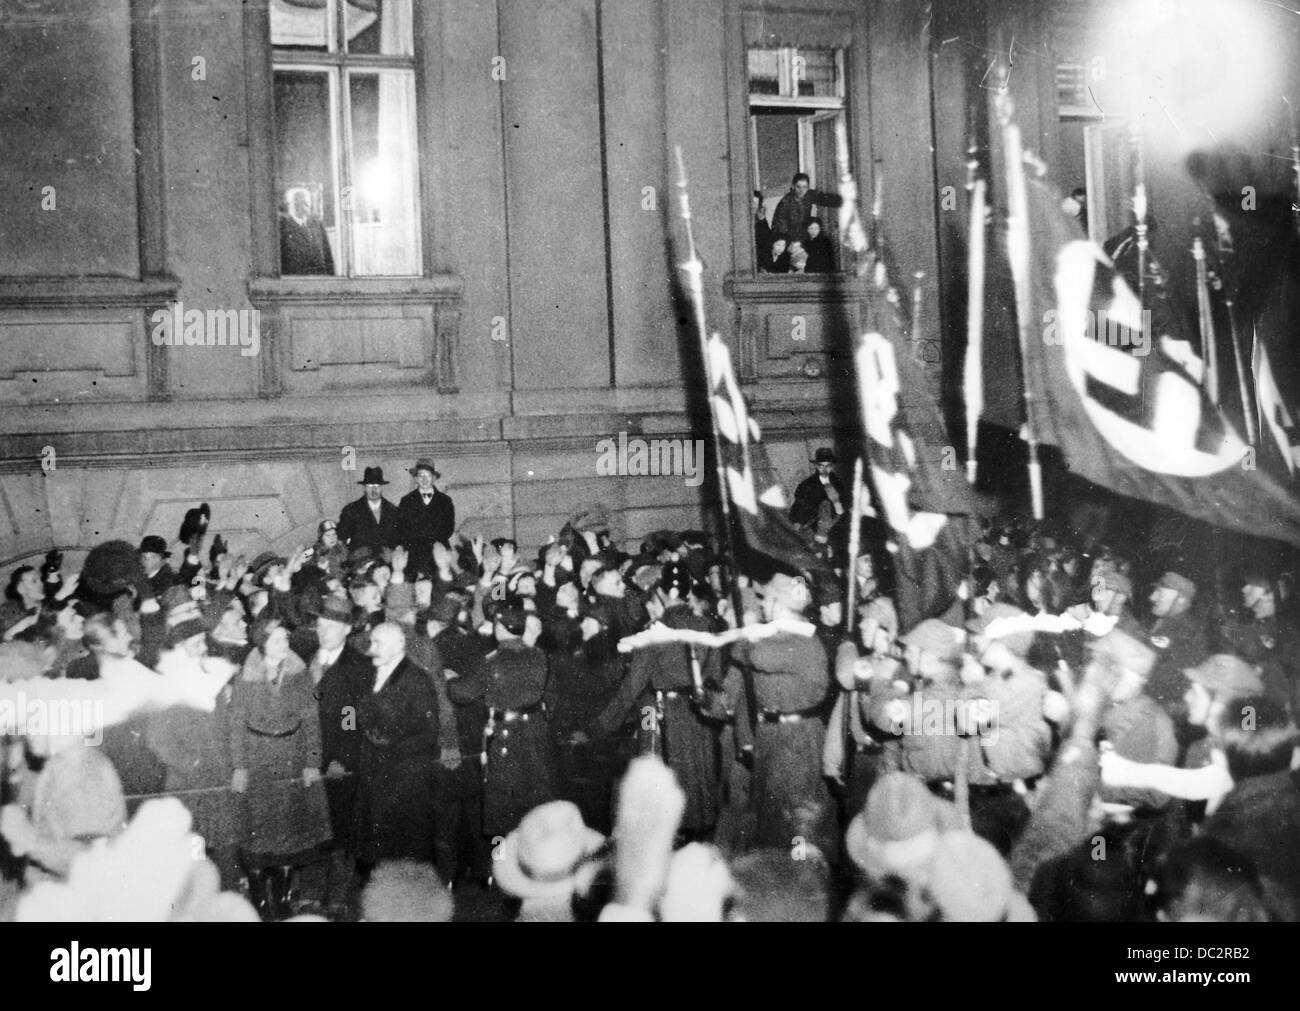 Reich President Paul von Hindenburg is pictured at the window of the Reich Chancellery in Berlin, Germany, on the night, on which Adolf Hitler was sworn into office as Reich Chancellor, 30 January 1933. The 'national associations' SA, SS, and Stahlhelm celebrate the 'seizure of power' by Hitler with a torch parade through the city centre of Berlin. Fotoarchiv für Zeitgeschichte Stock Photo